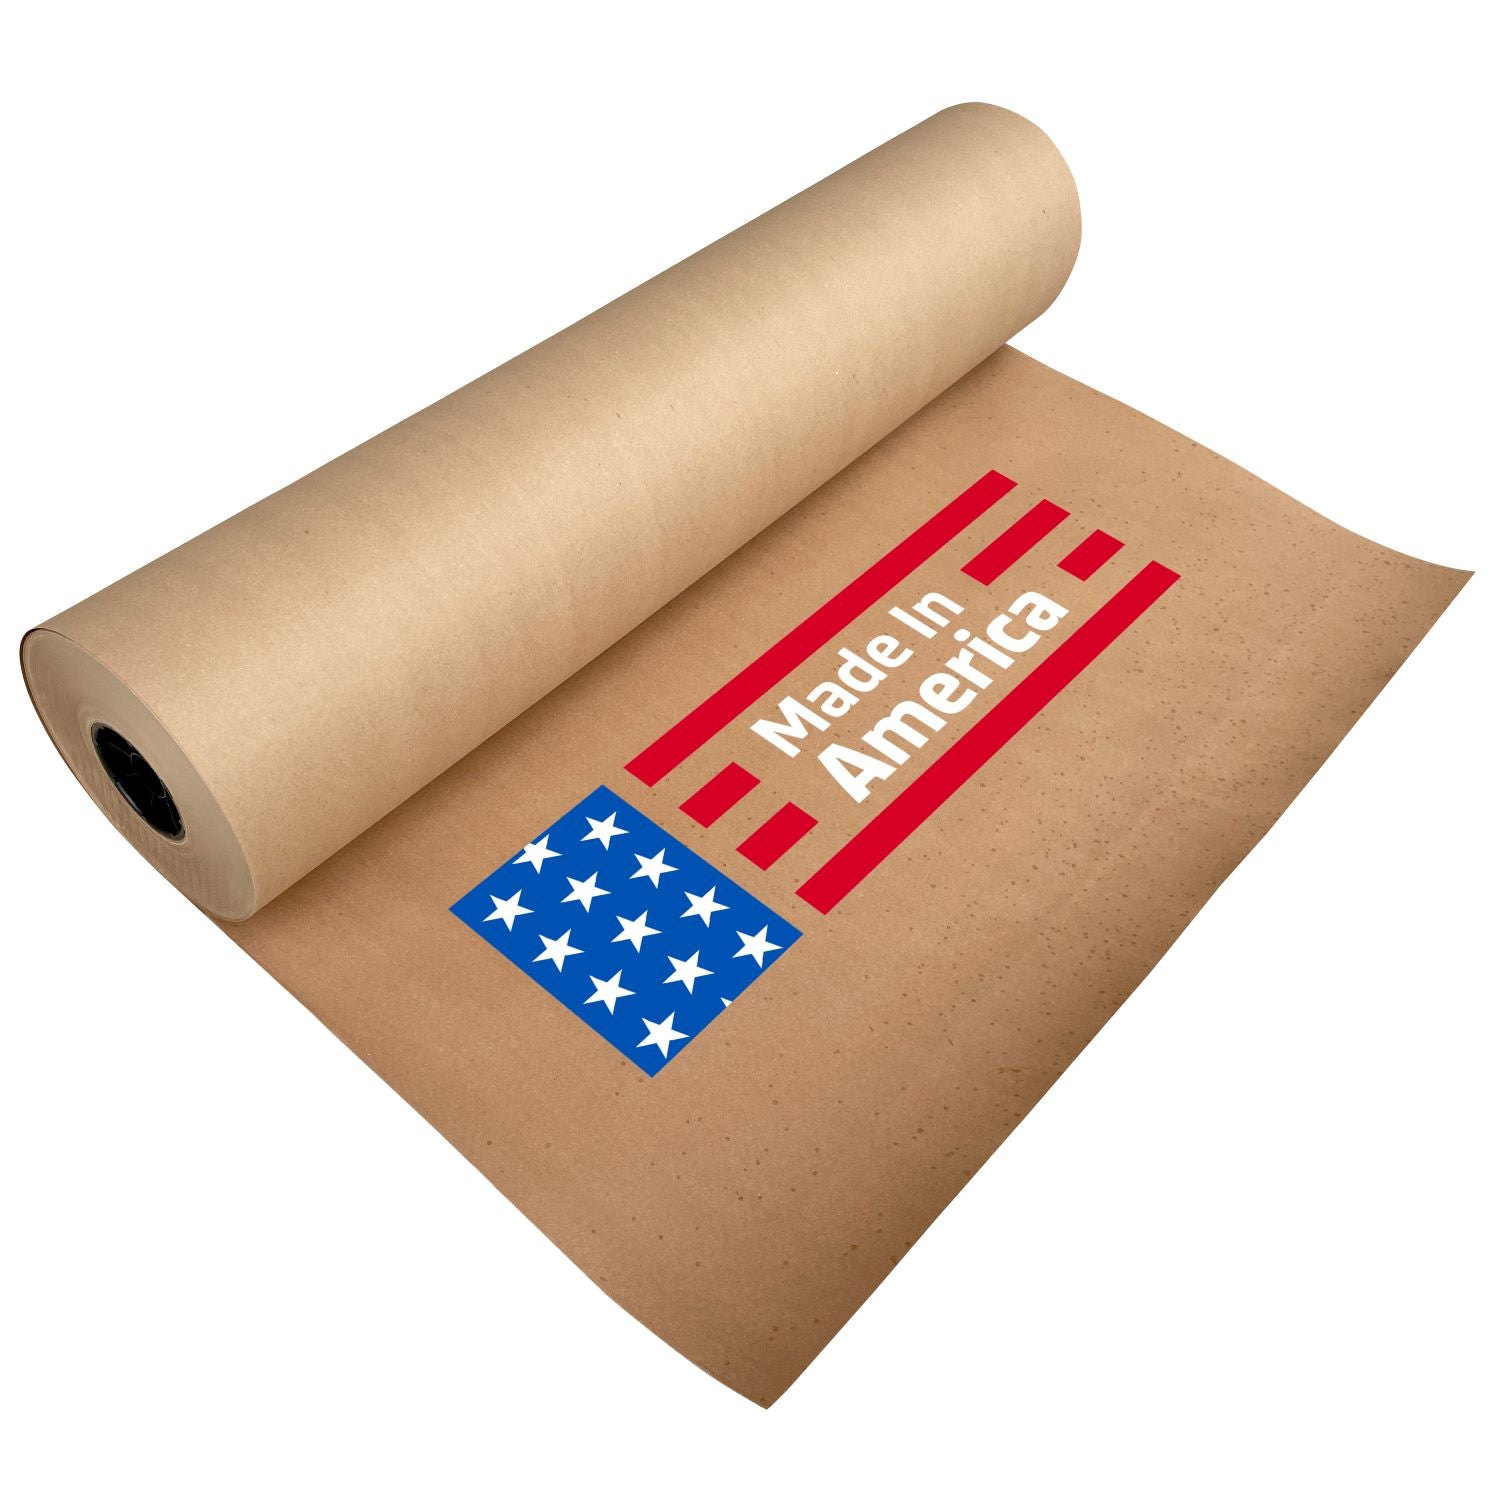 24 inch Lightweight Kraft Paper Rolls - 30 lb. Recycled Paper (Brown)